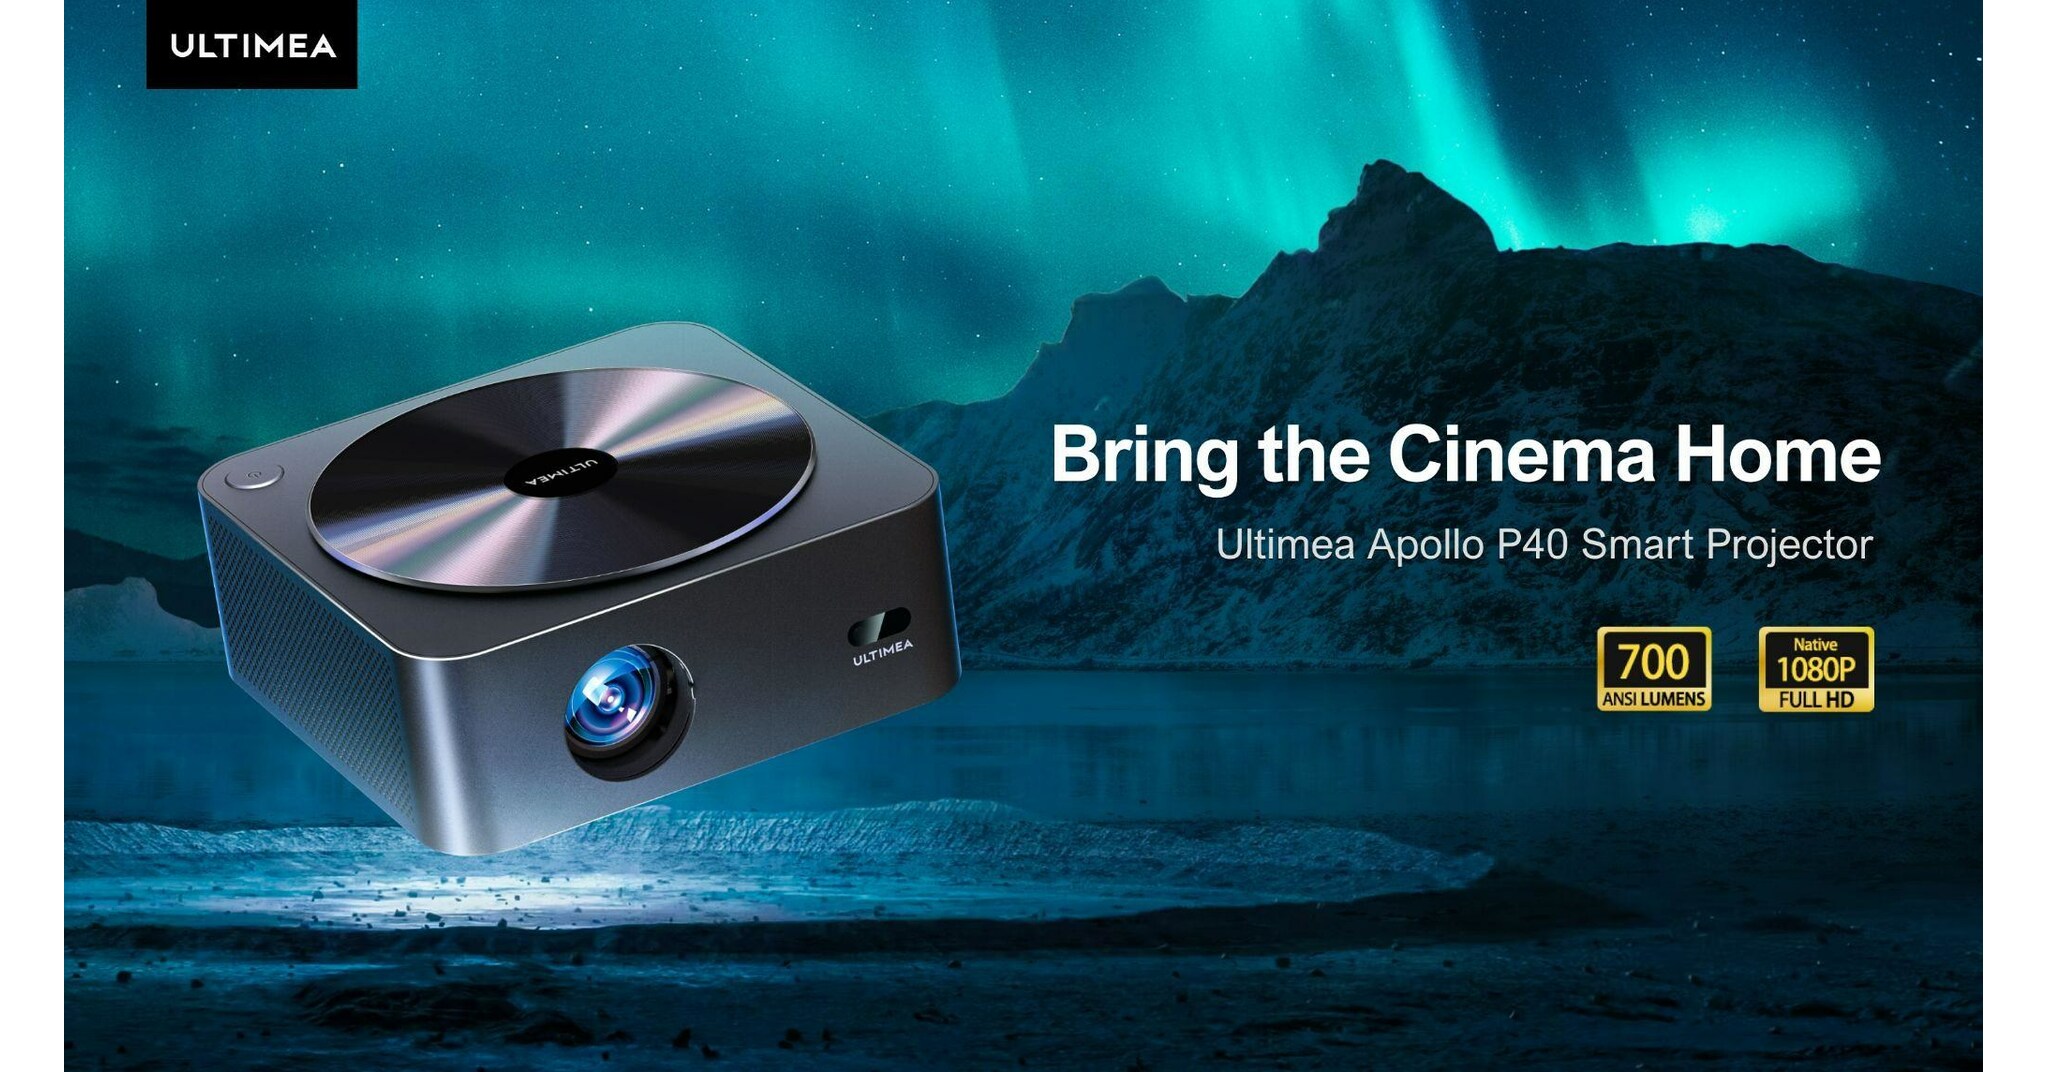 Auto Focus/4K Support] Projector with WiFi 6 and Comoros